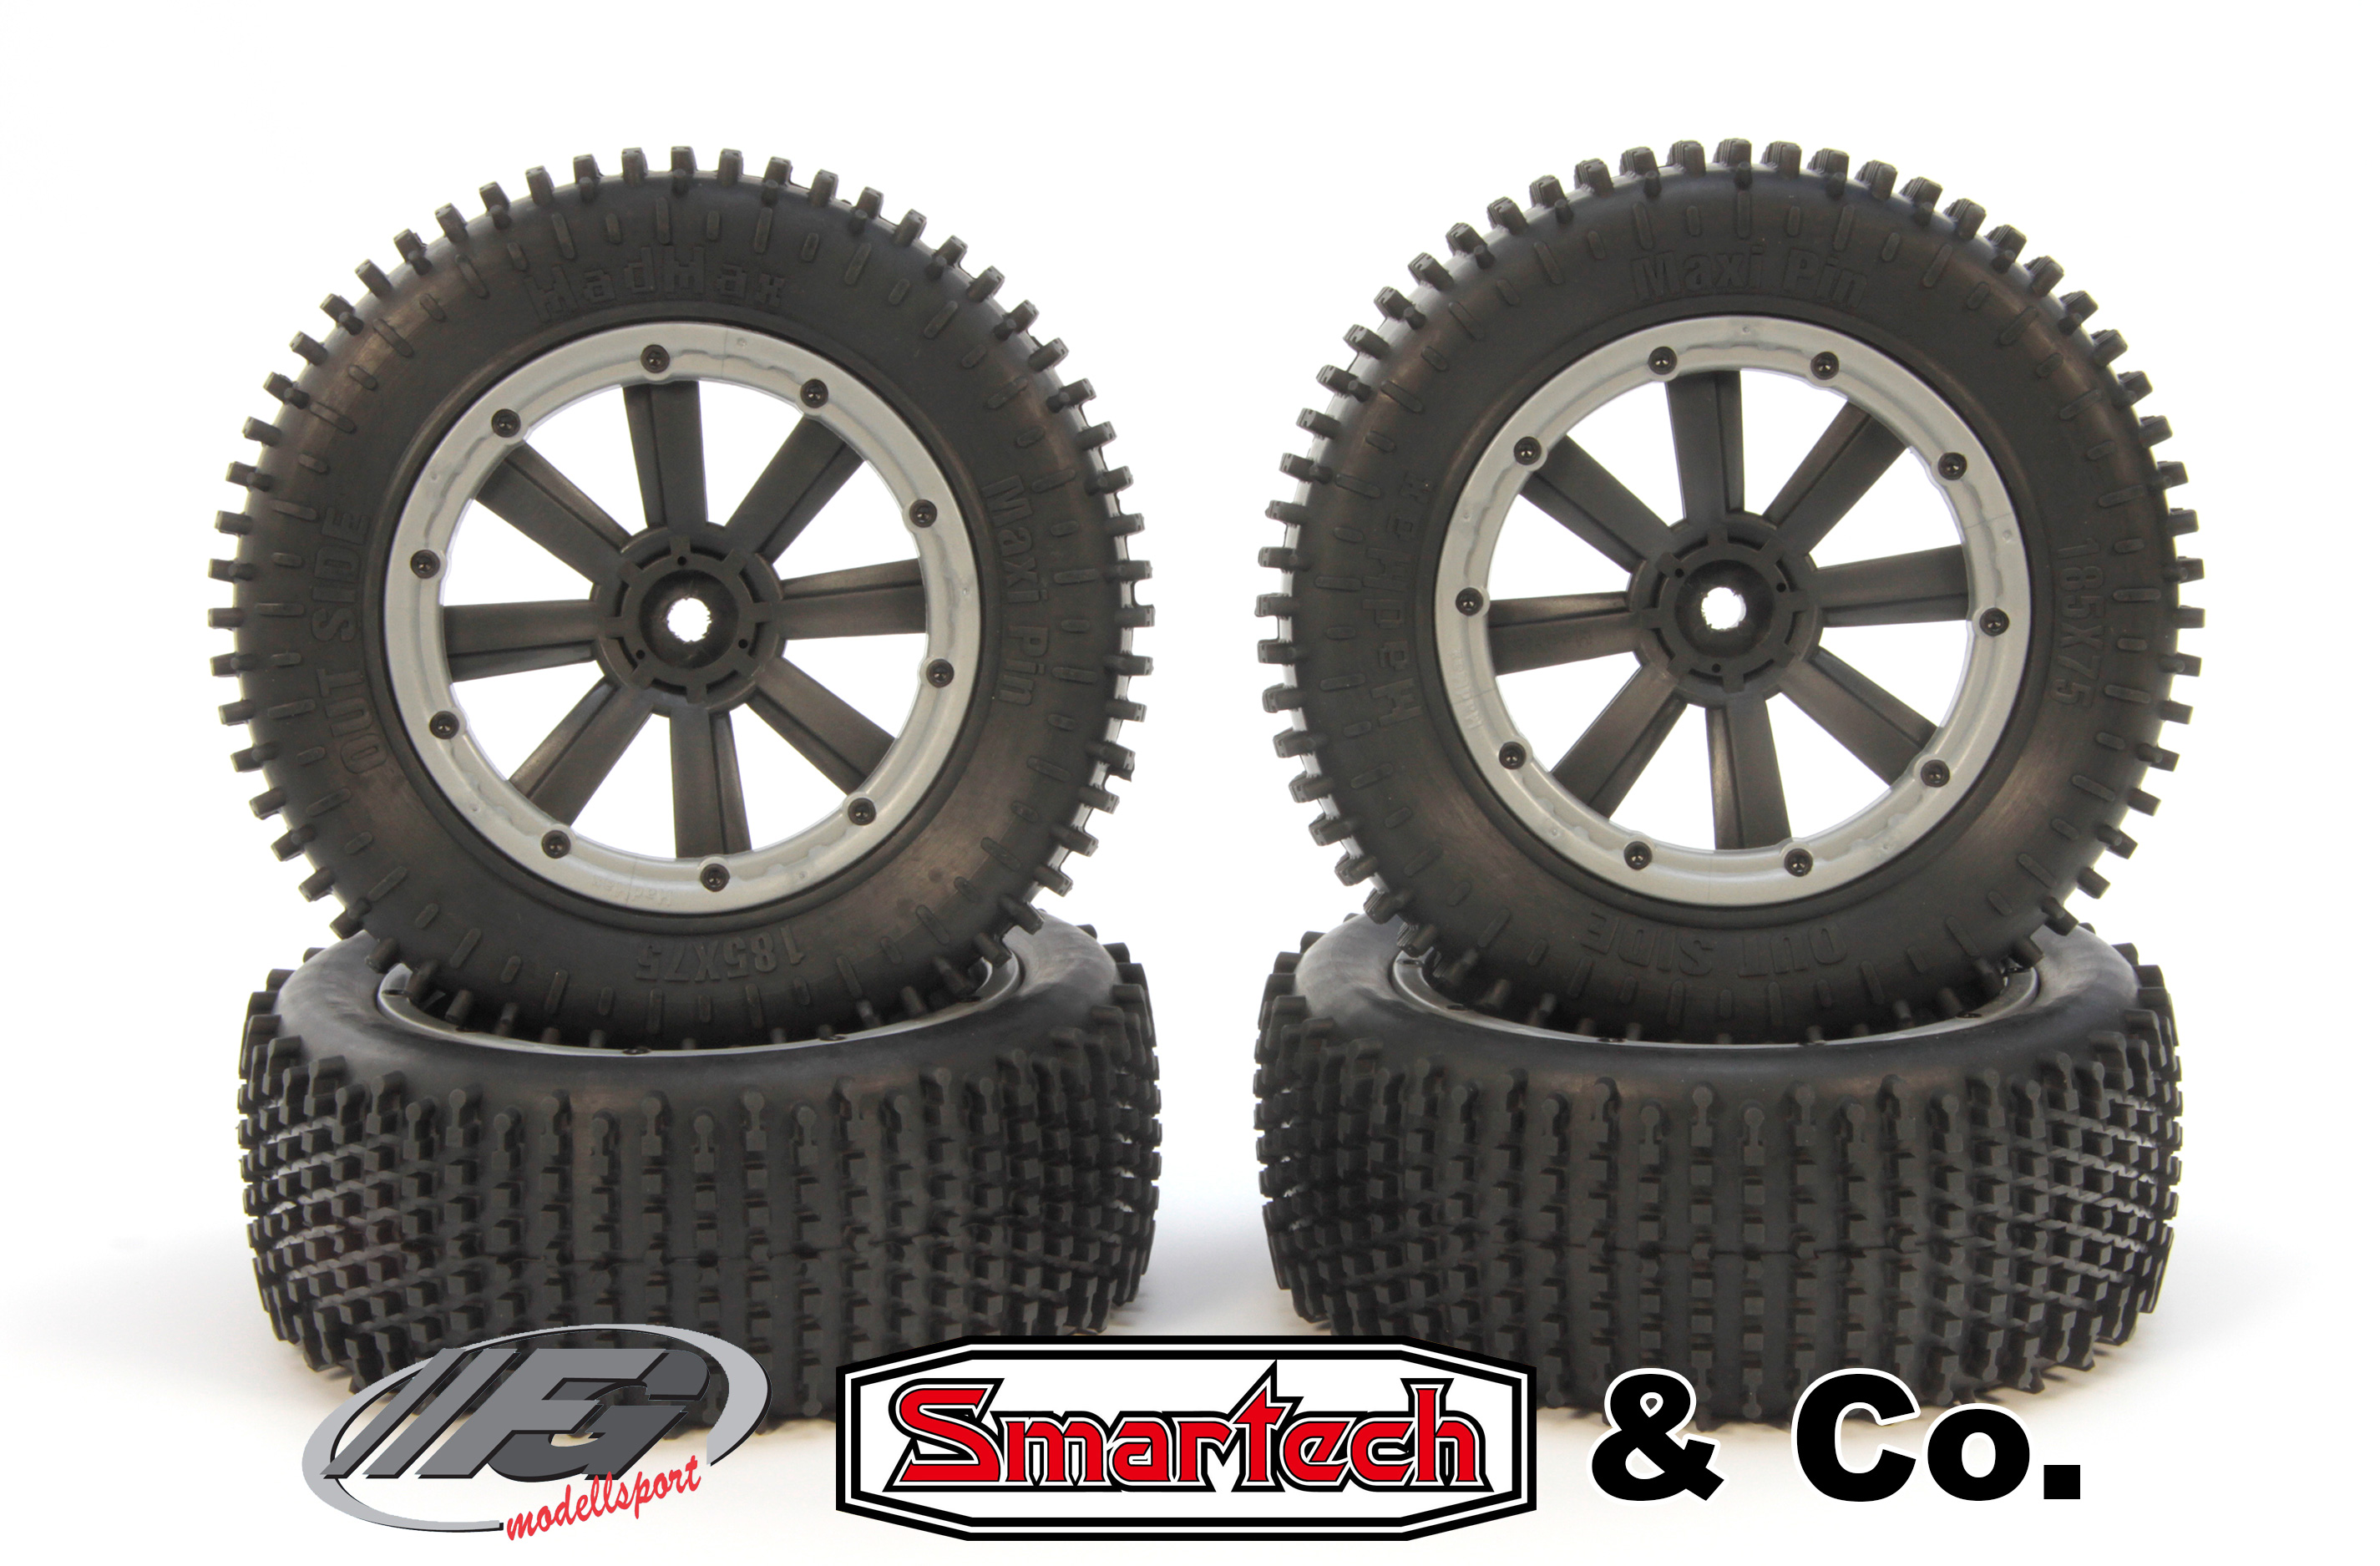 y1445/01 MadMax MAXI PIN tires for FG/Smartech & Co (18mm wheel square) Offer